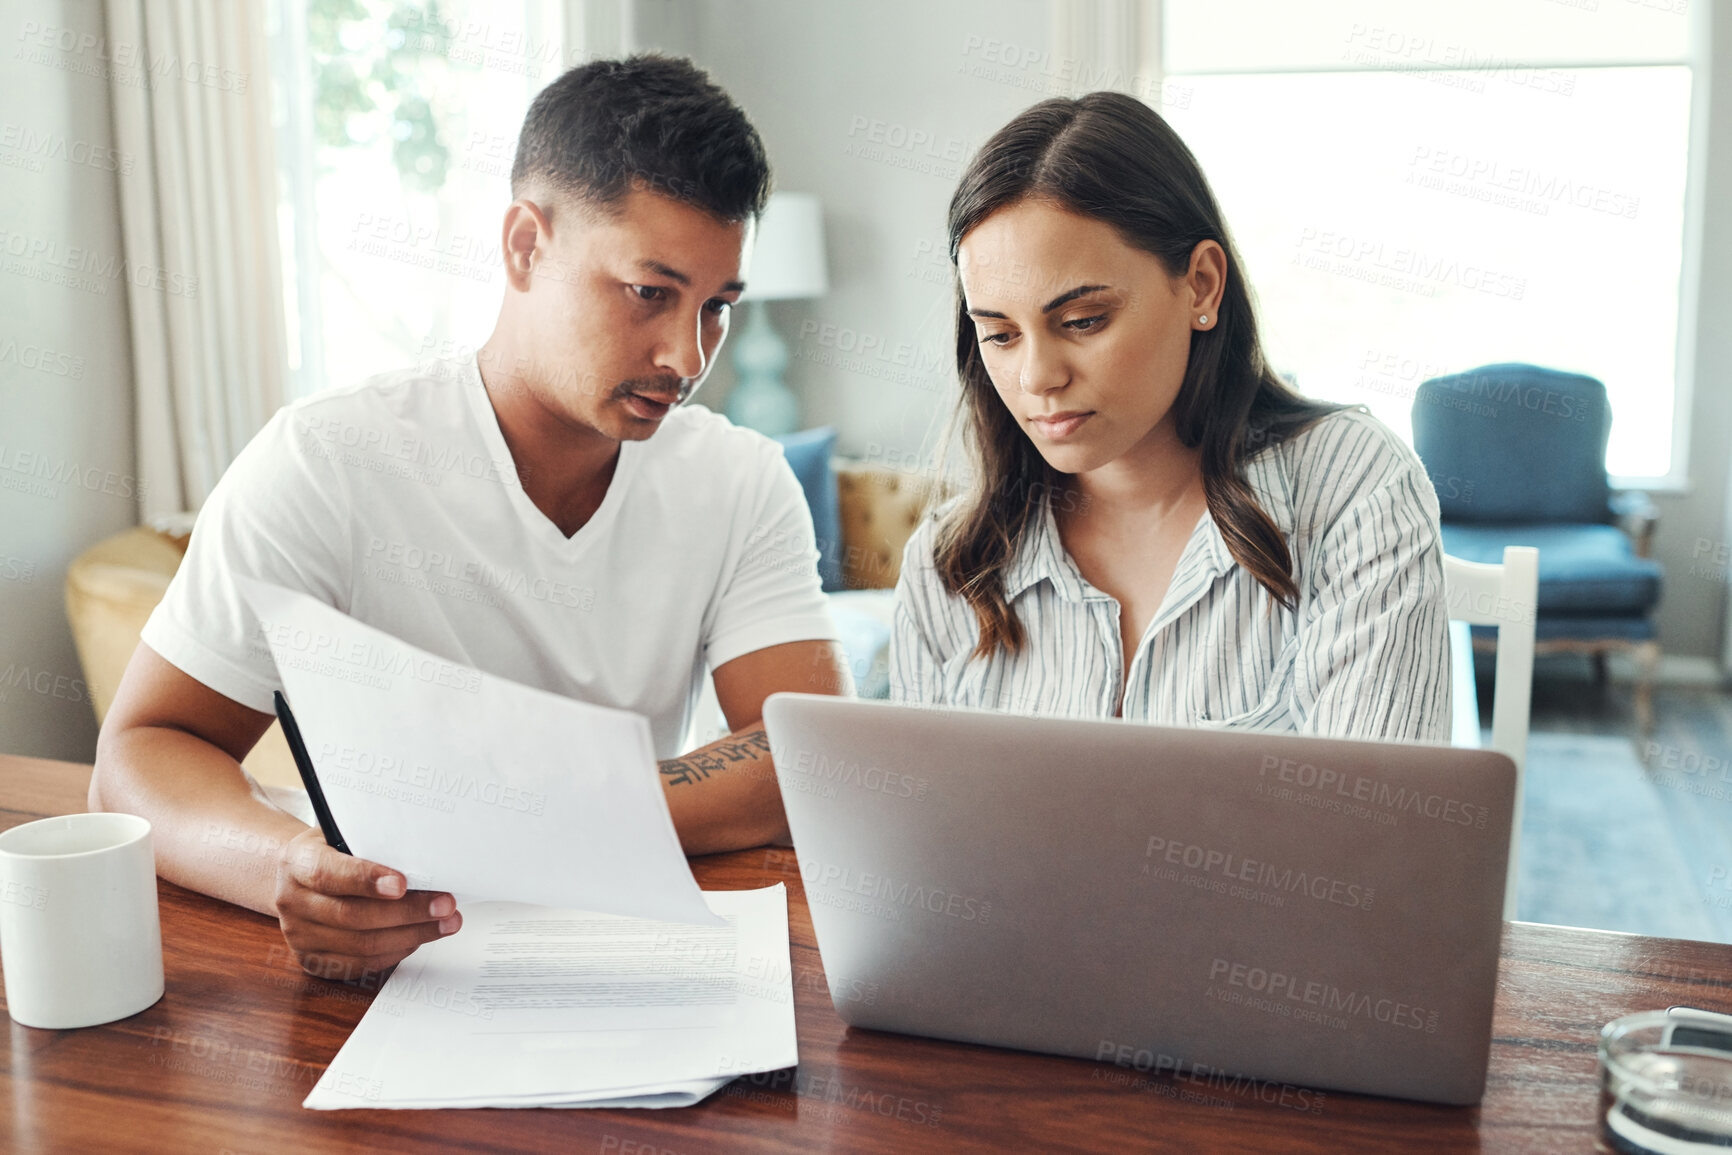 Buy stock photo Cropped shot of a young couple using a laptop to their household budget in the living room at home